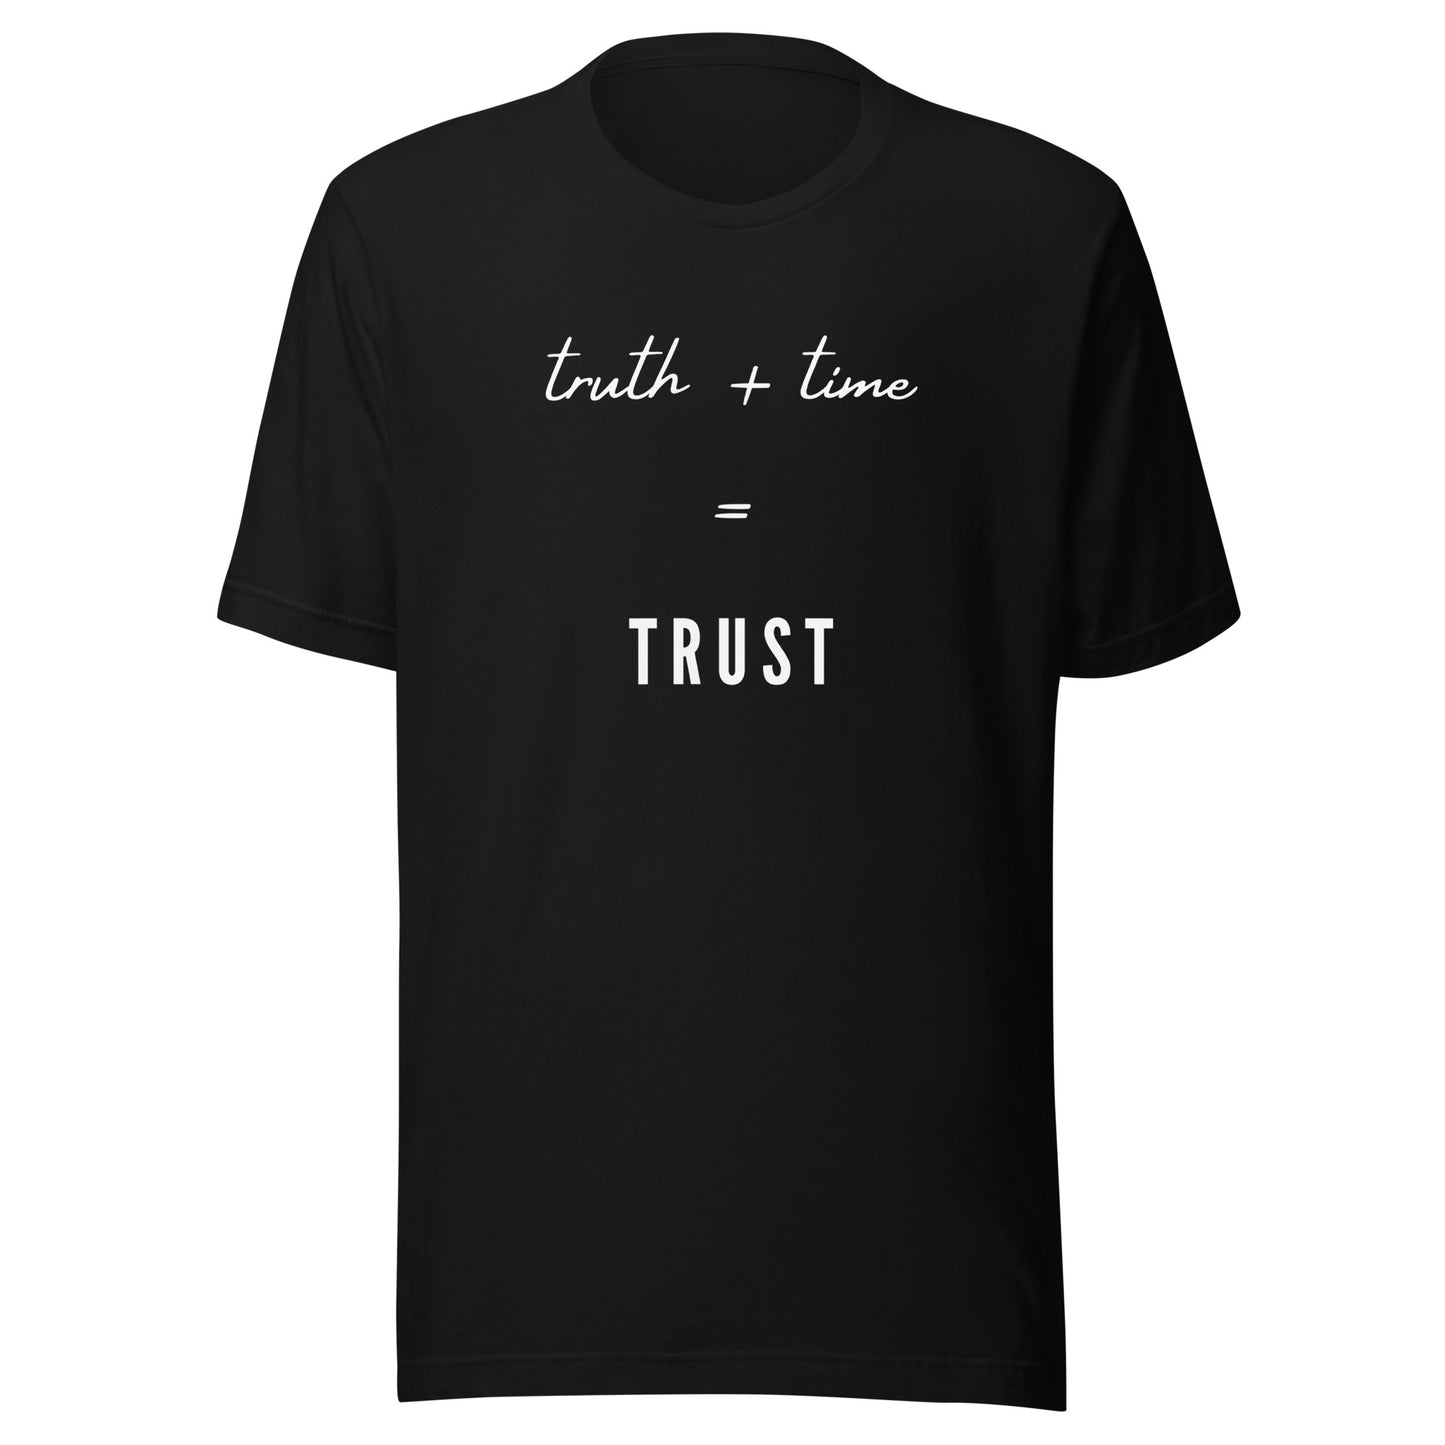 Truth + Time - Unisex t-shirt